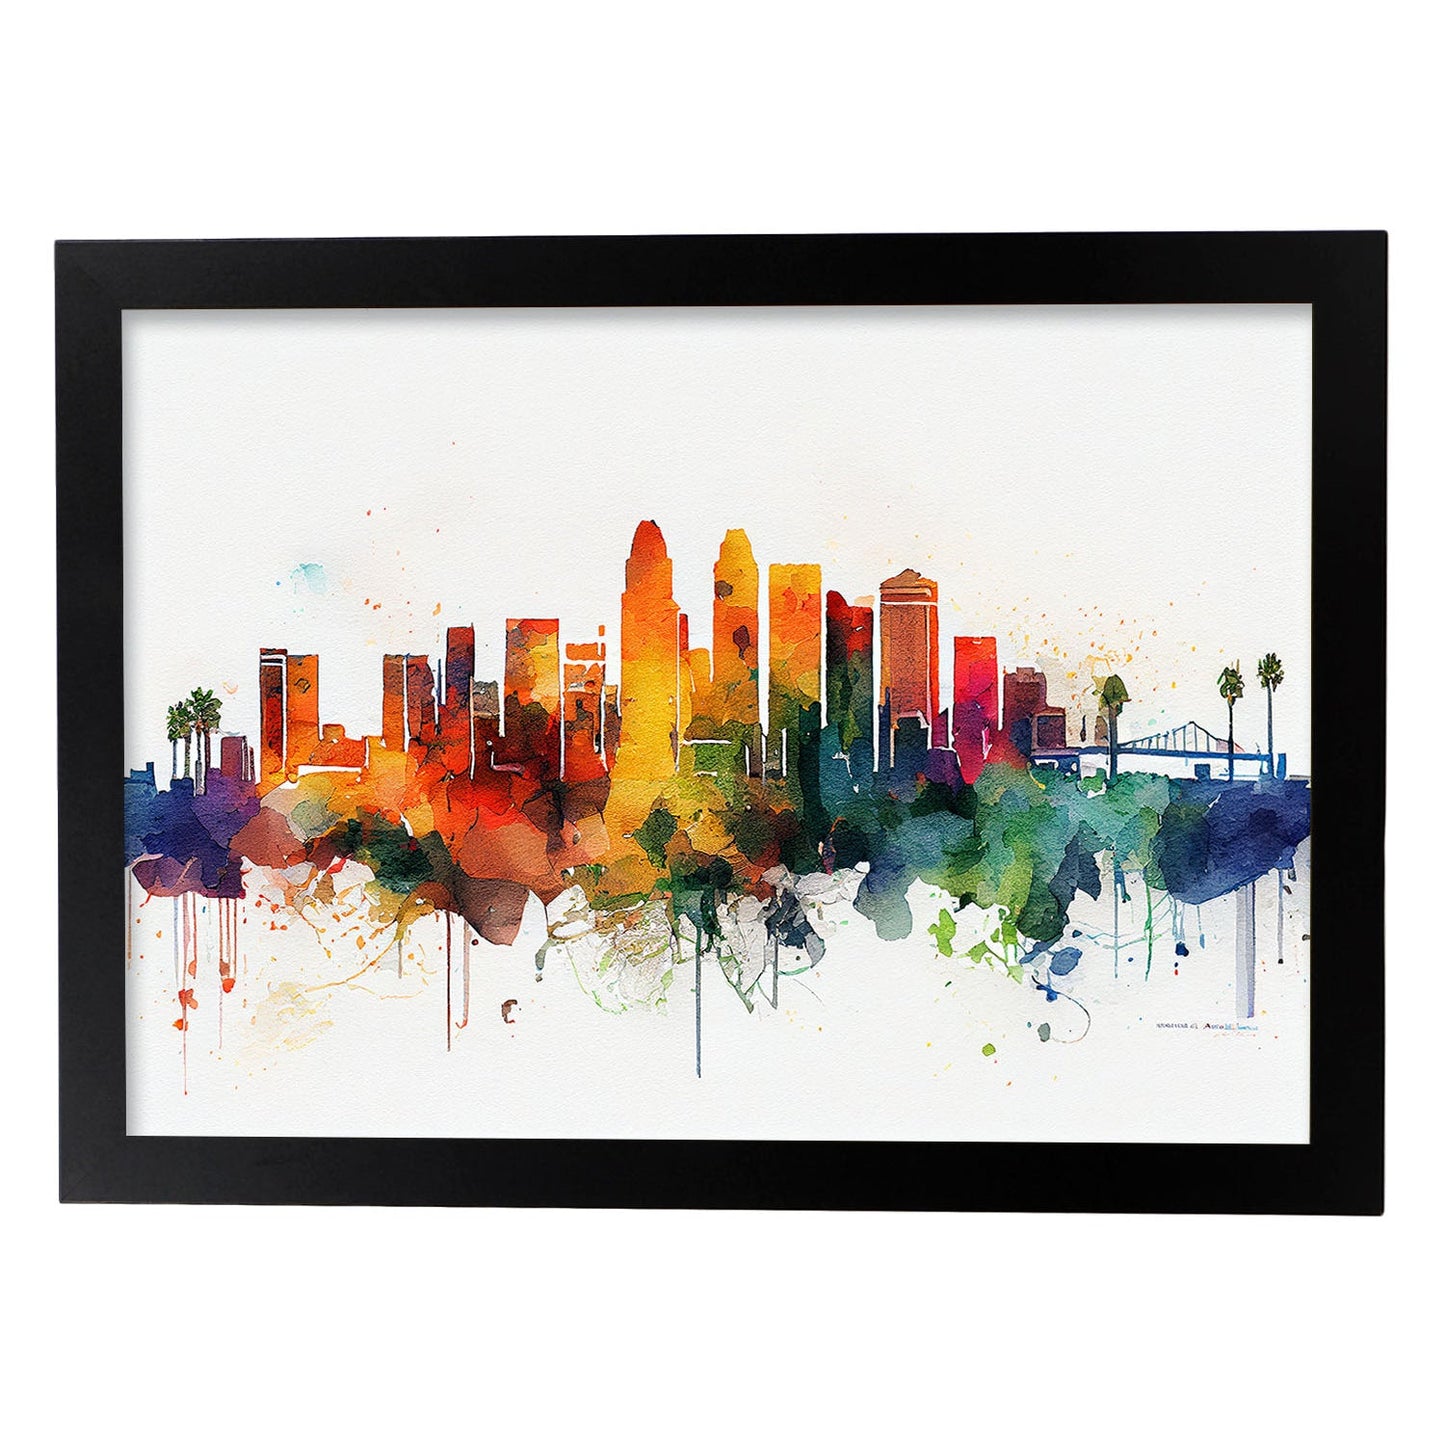 Nacnic watercolor of a skyline of the city of Los Angeles_2. Aesthetic Wall Art Prints for Bedroom or Living Room Design.